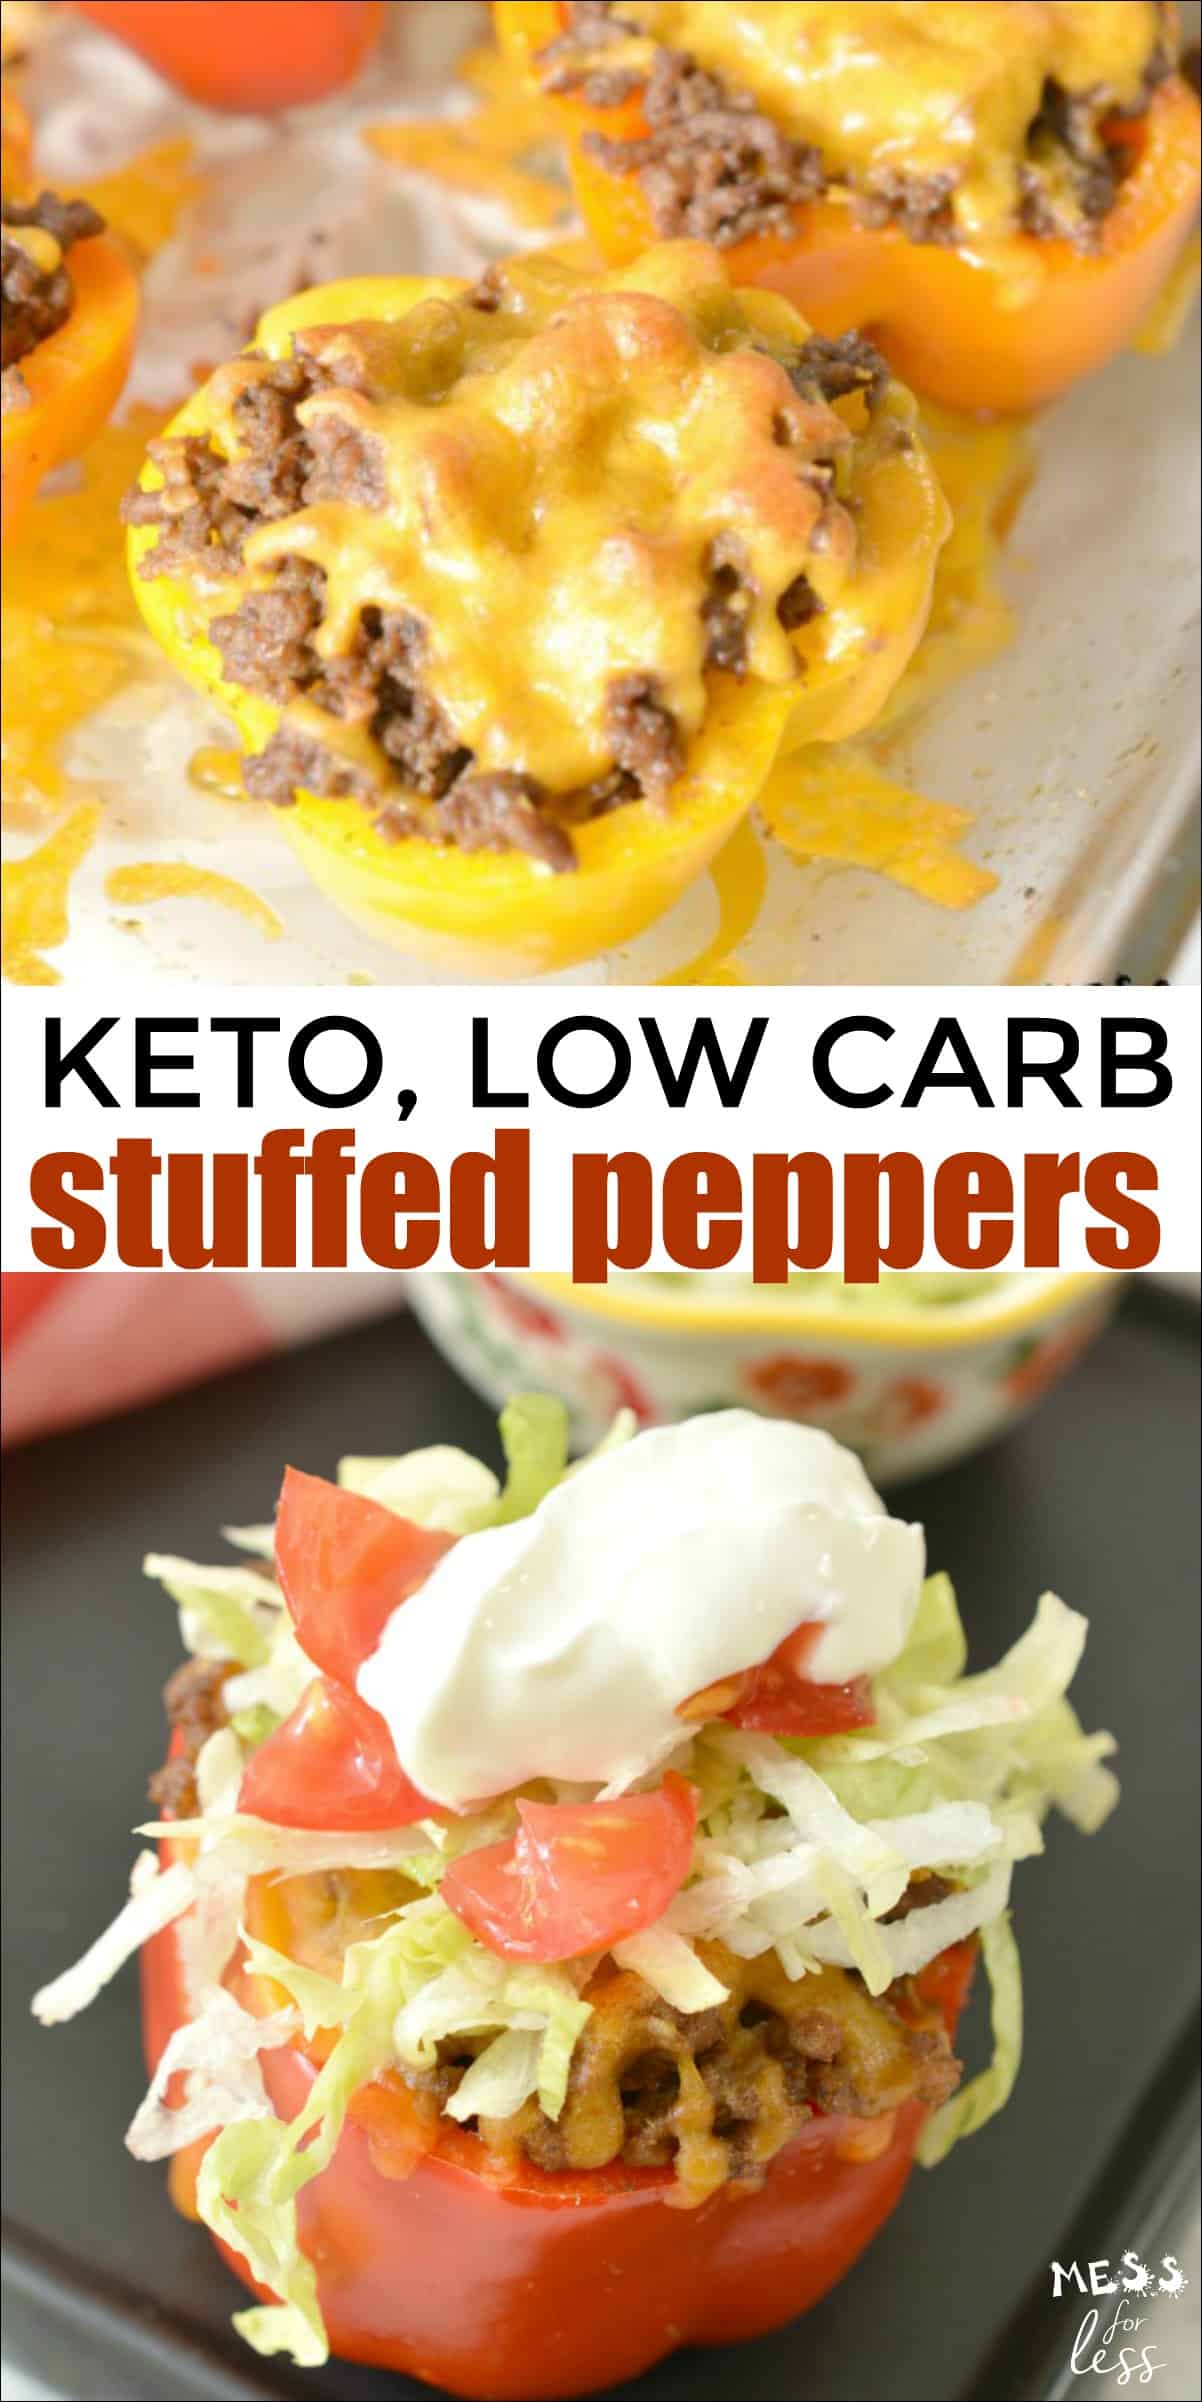 These taco stuffed peppers (keto, low Carb) are cheesy and delicious. These are great if you are following a low carb or keto diet. #keto #lowcarb